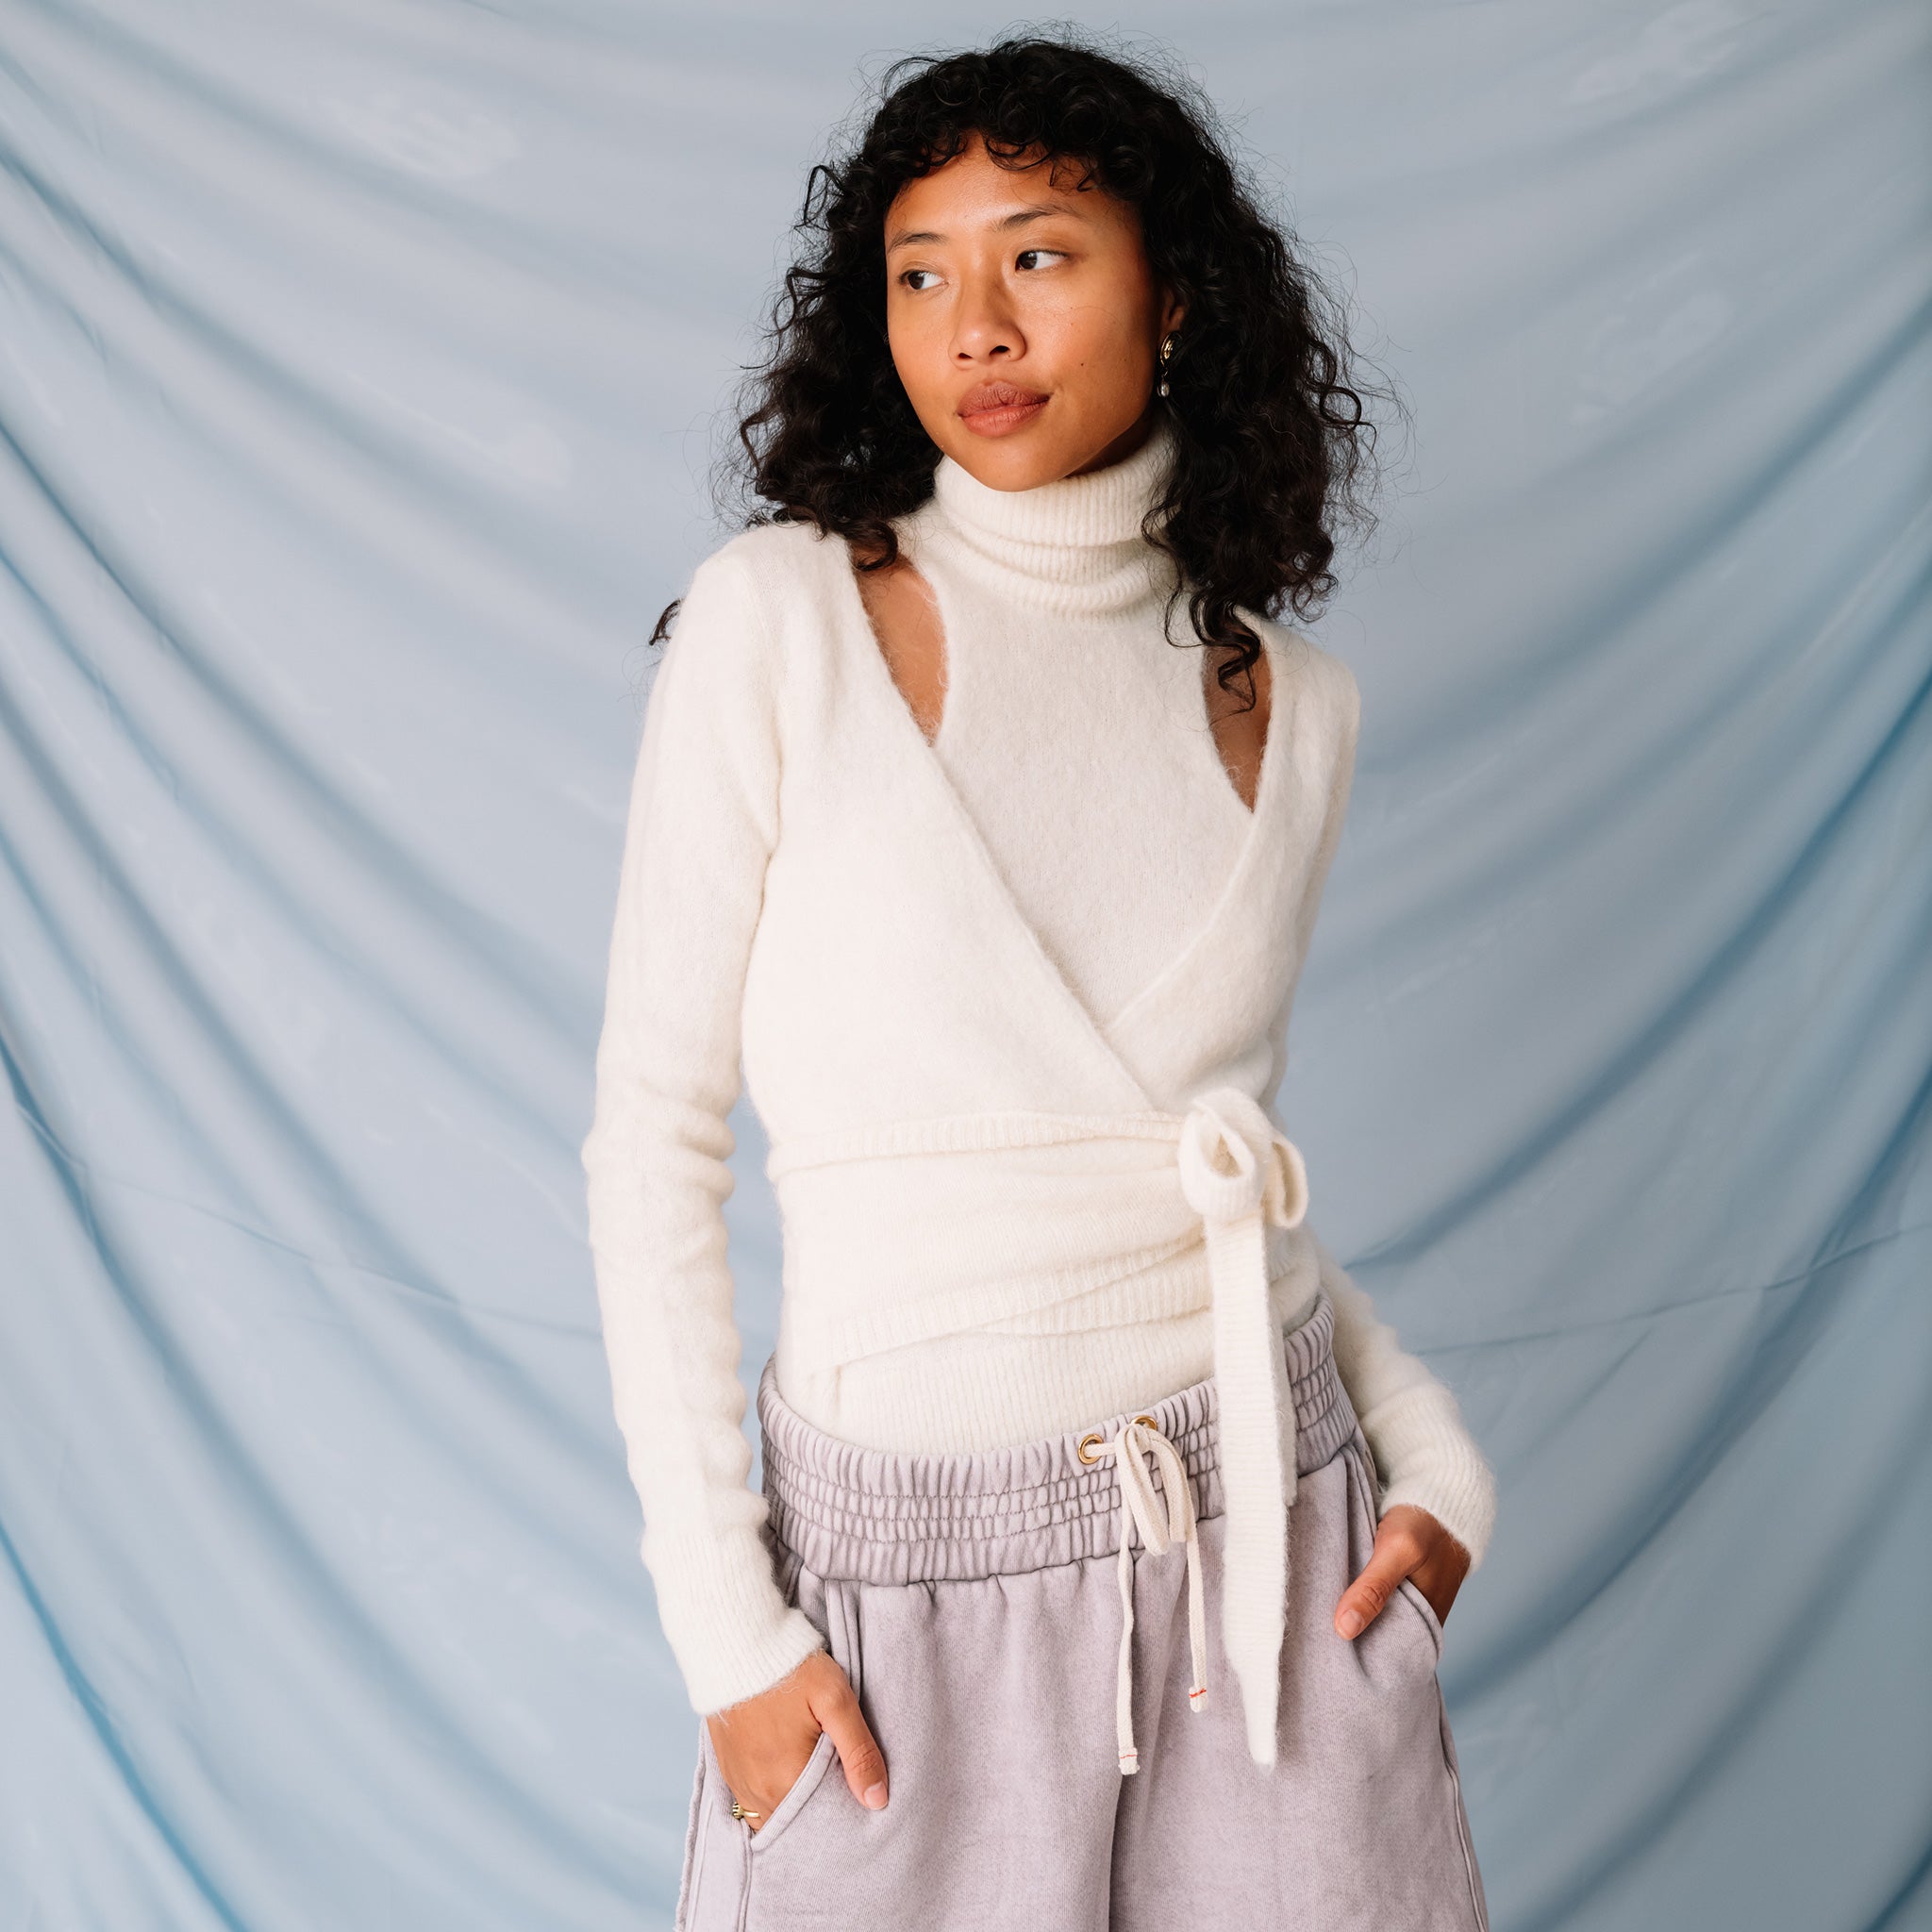 A model looks to the side while wearing a soft-looking white wrap sweater by GANNI with clavicle cut outs.